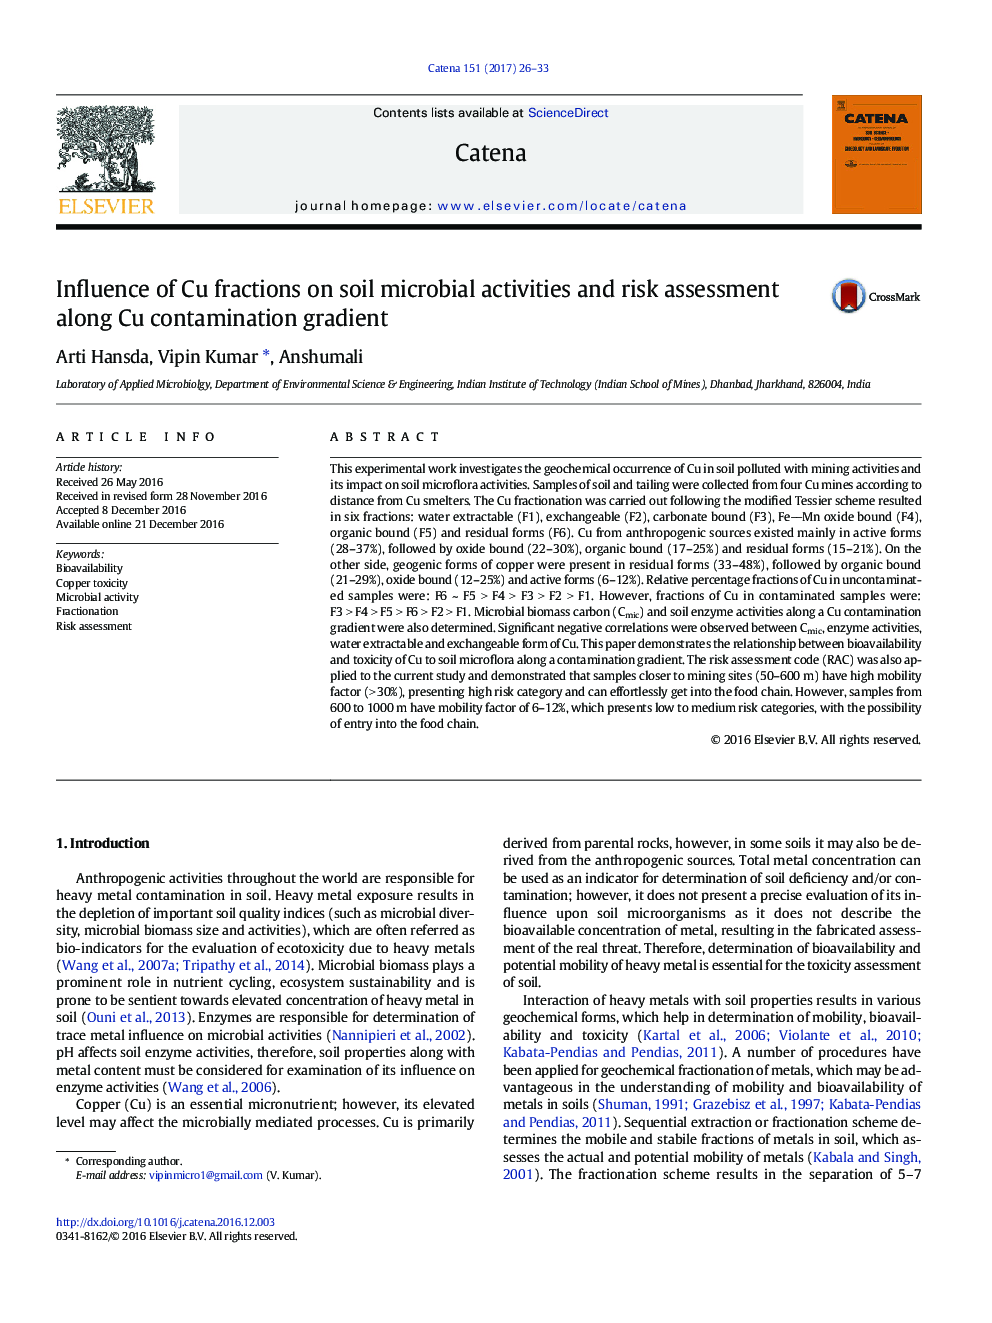 Influence of Cu fractions on soil microbial activities and risk assessment along Cu contamination gradient